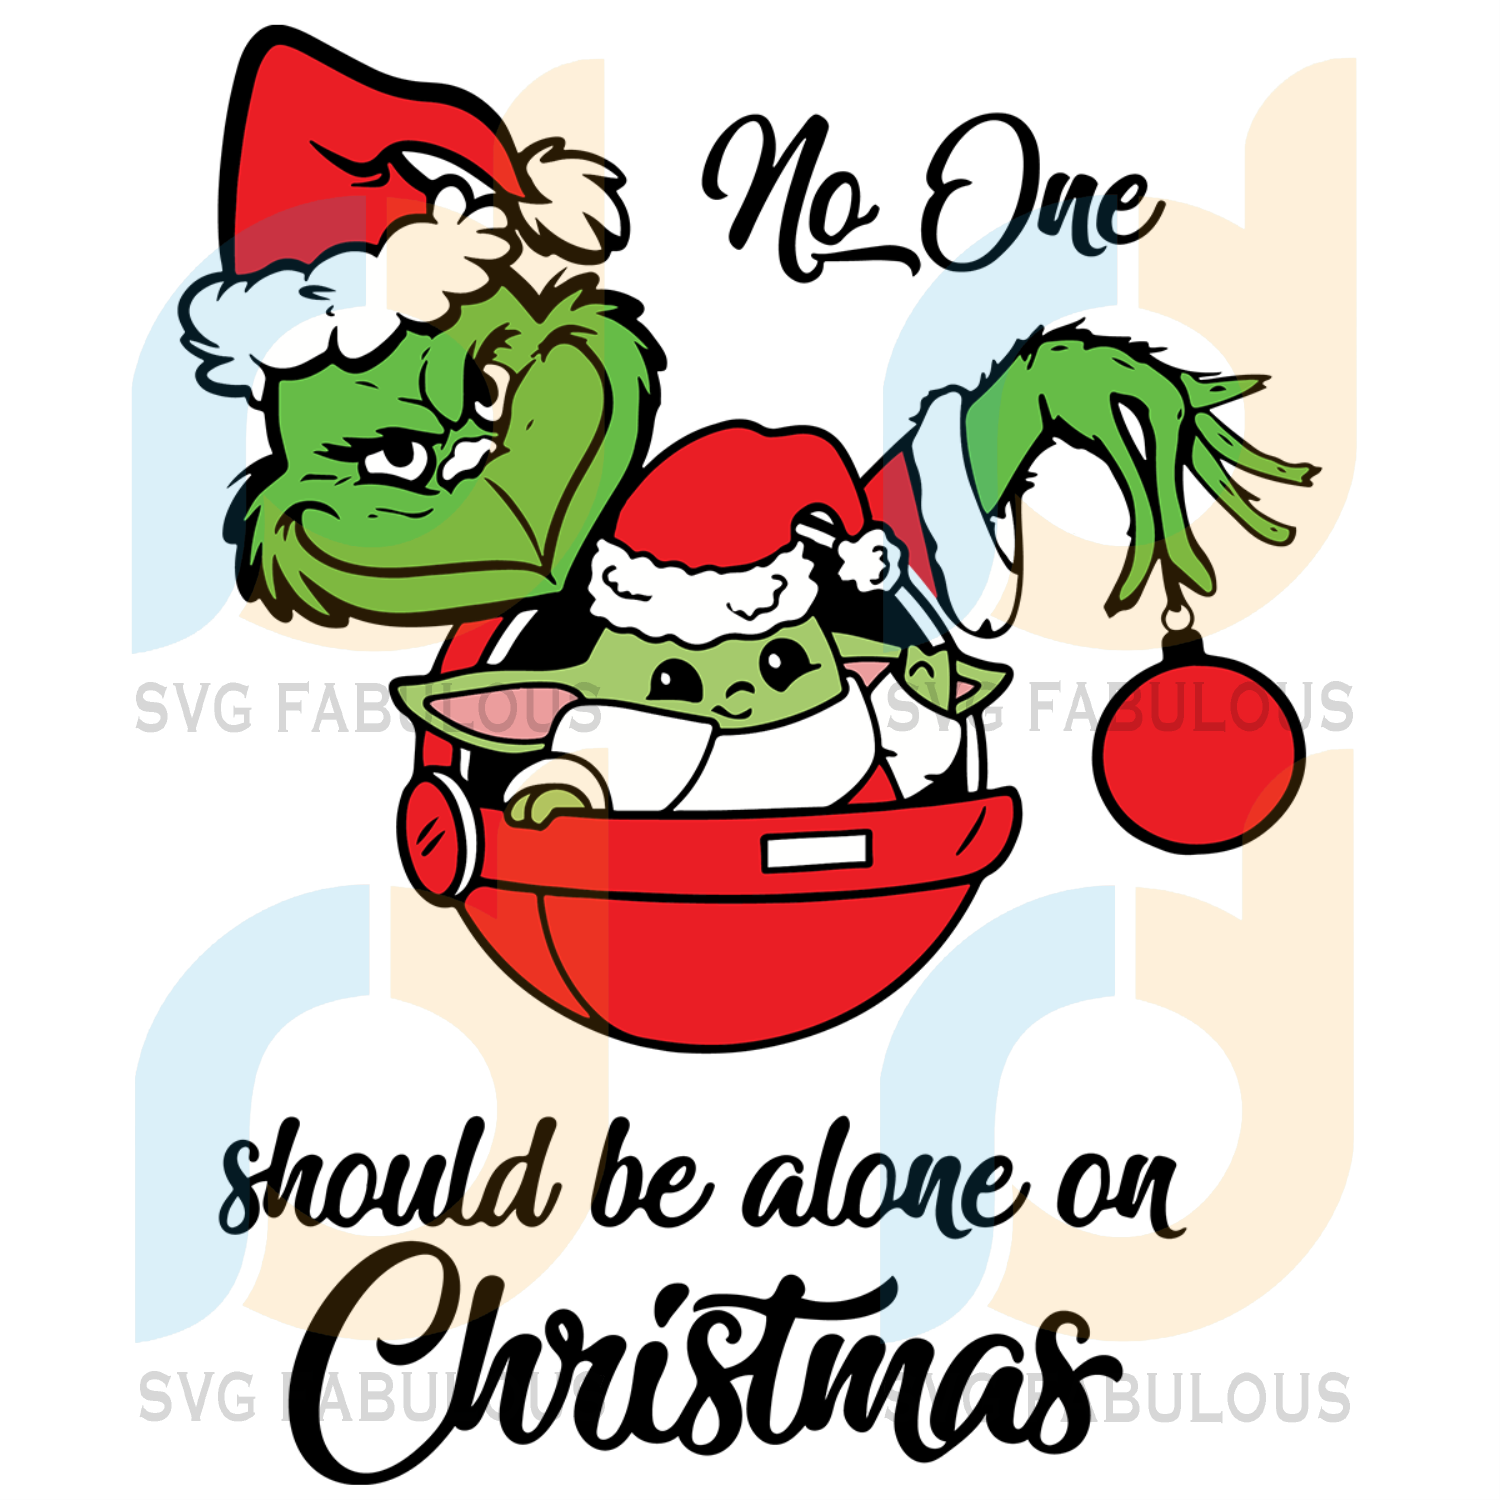 Download No One Should Be Alone On Christmas Svg Christmas Svg Xmas Svg Chri Svg Fabulous